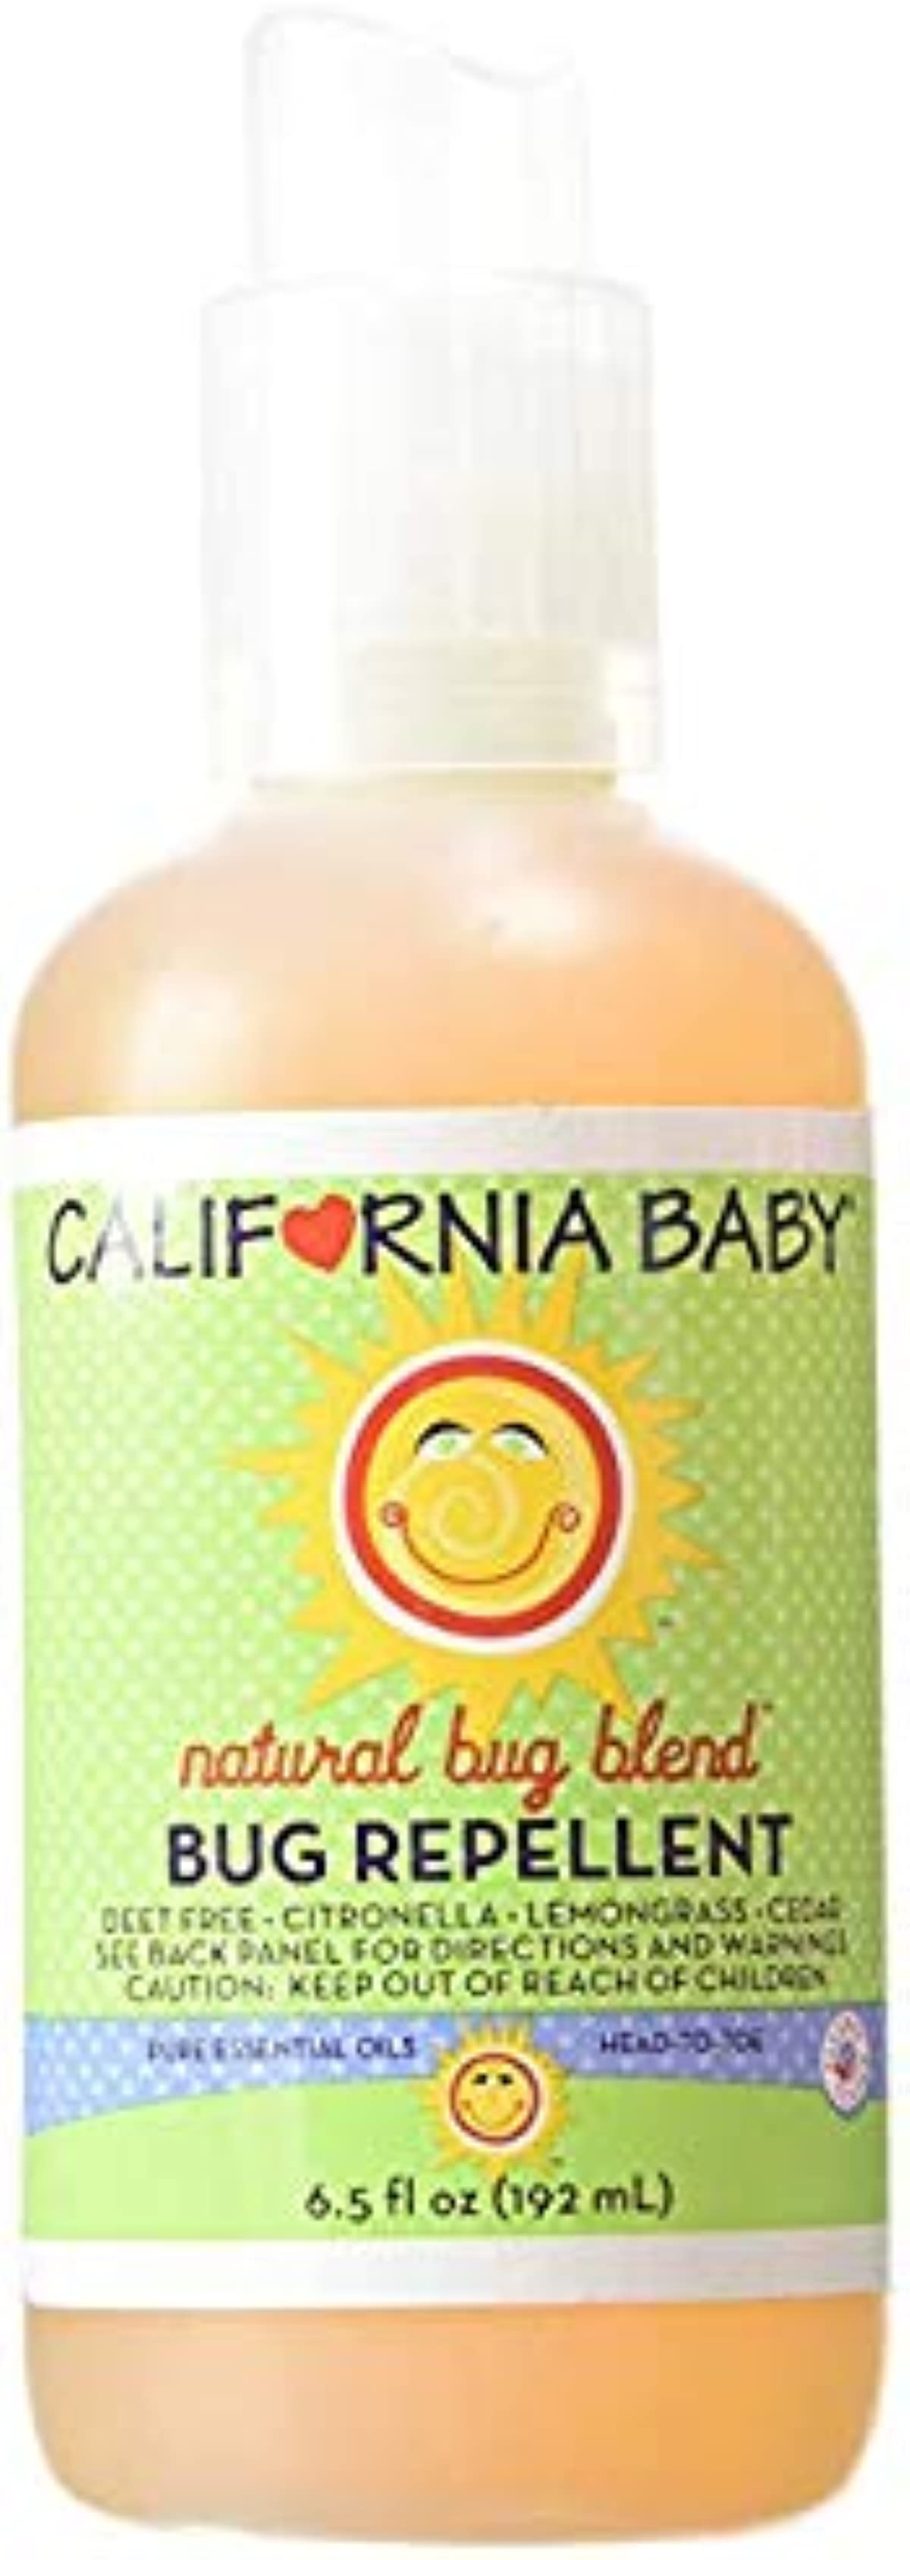 California Baby Plant-Based Natural Bug Repellant Spray (6.5 fl. oz.) Skin Safe, Plant-Based Formula for Babies, Toddlers, Kids | Outdoor Protection from Mosquitoes (1 Pack)